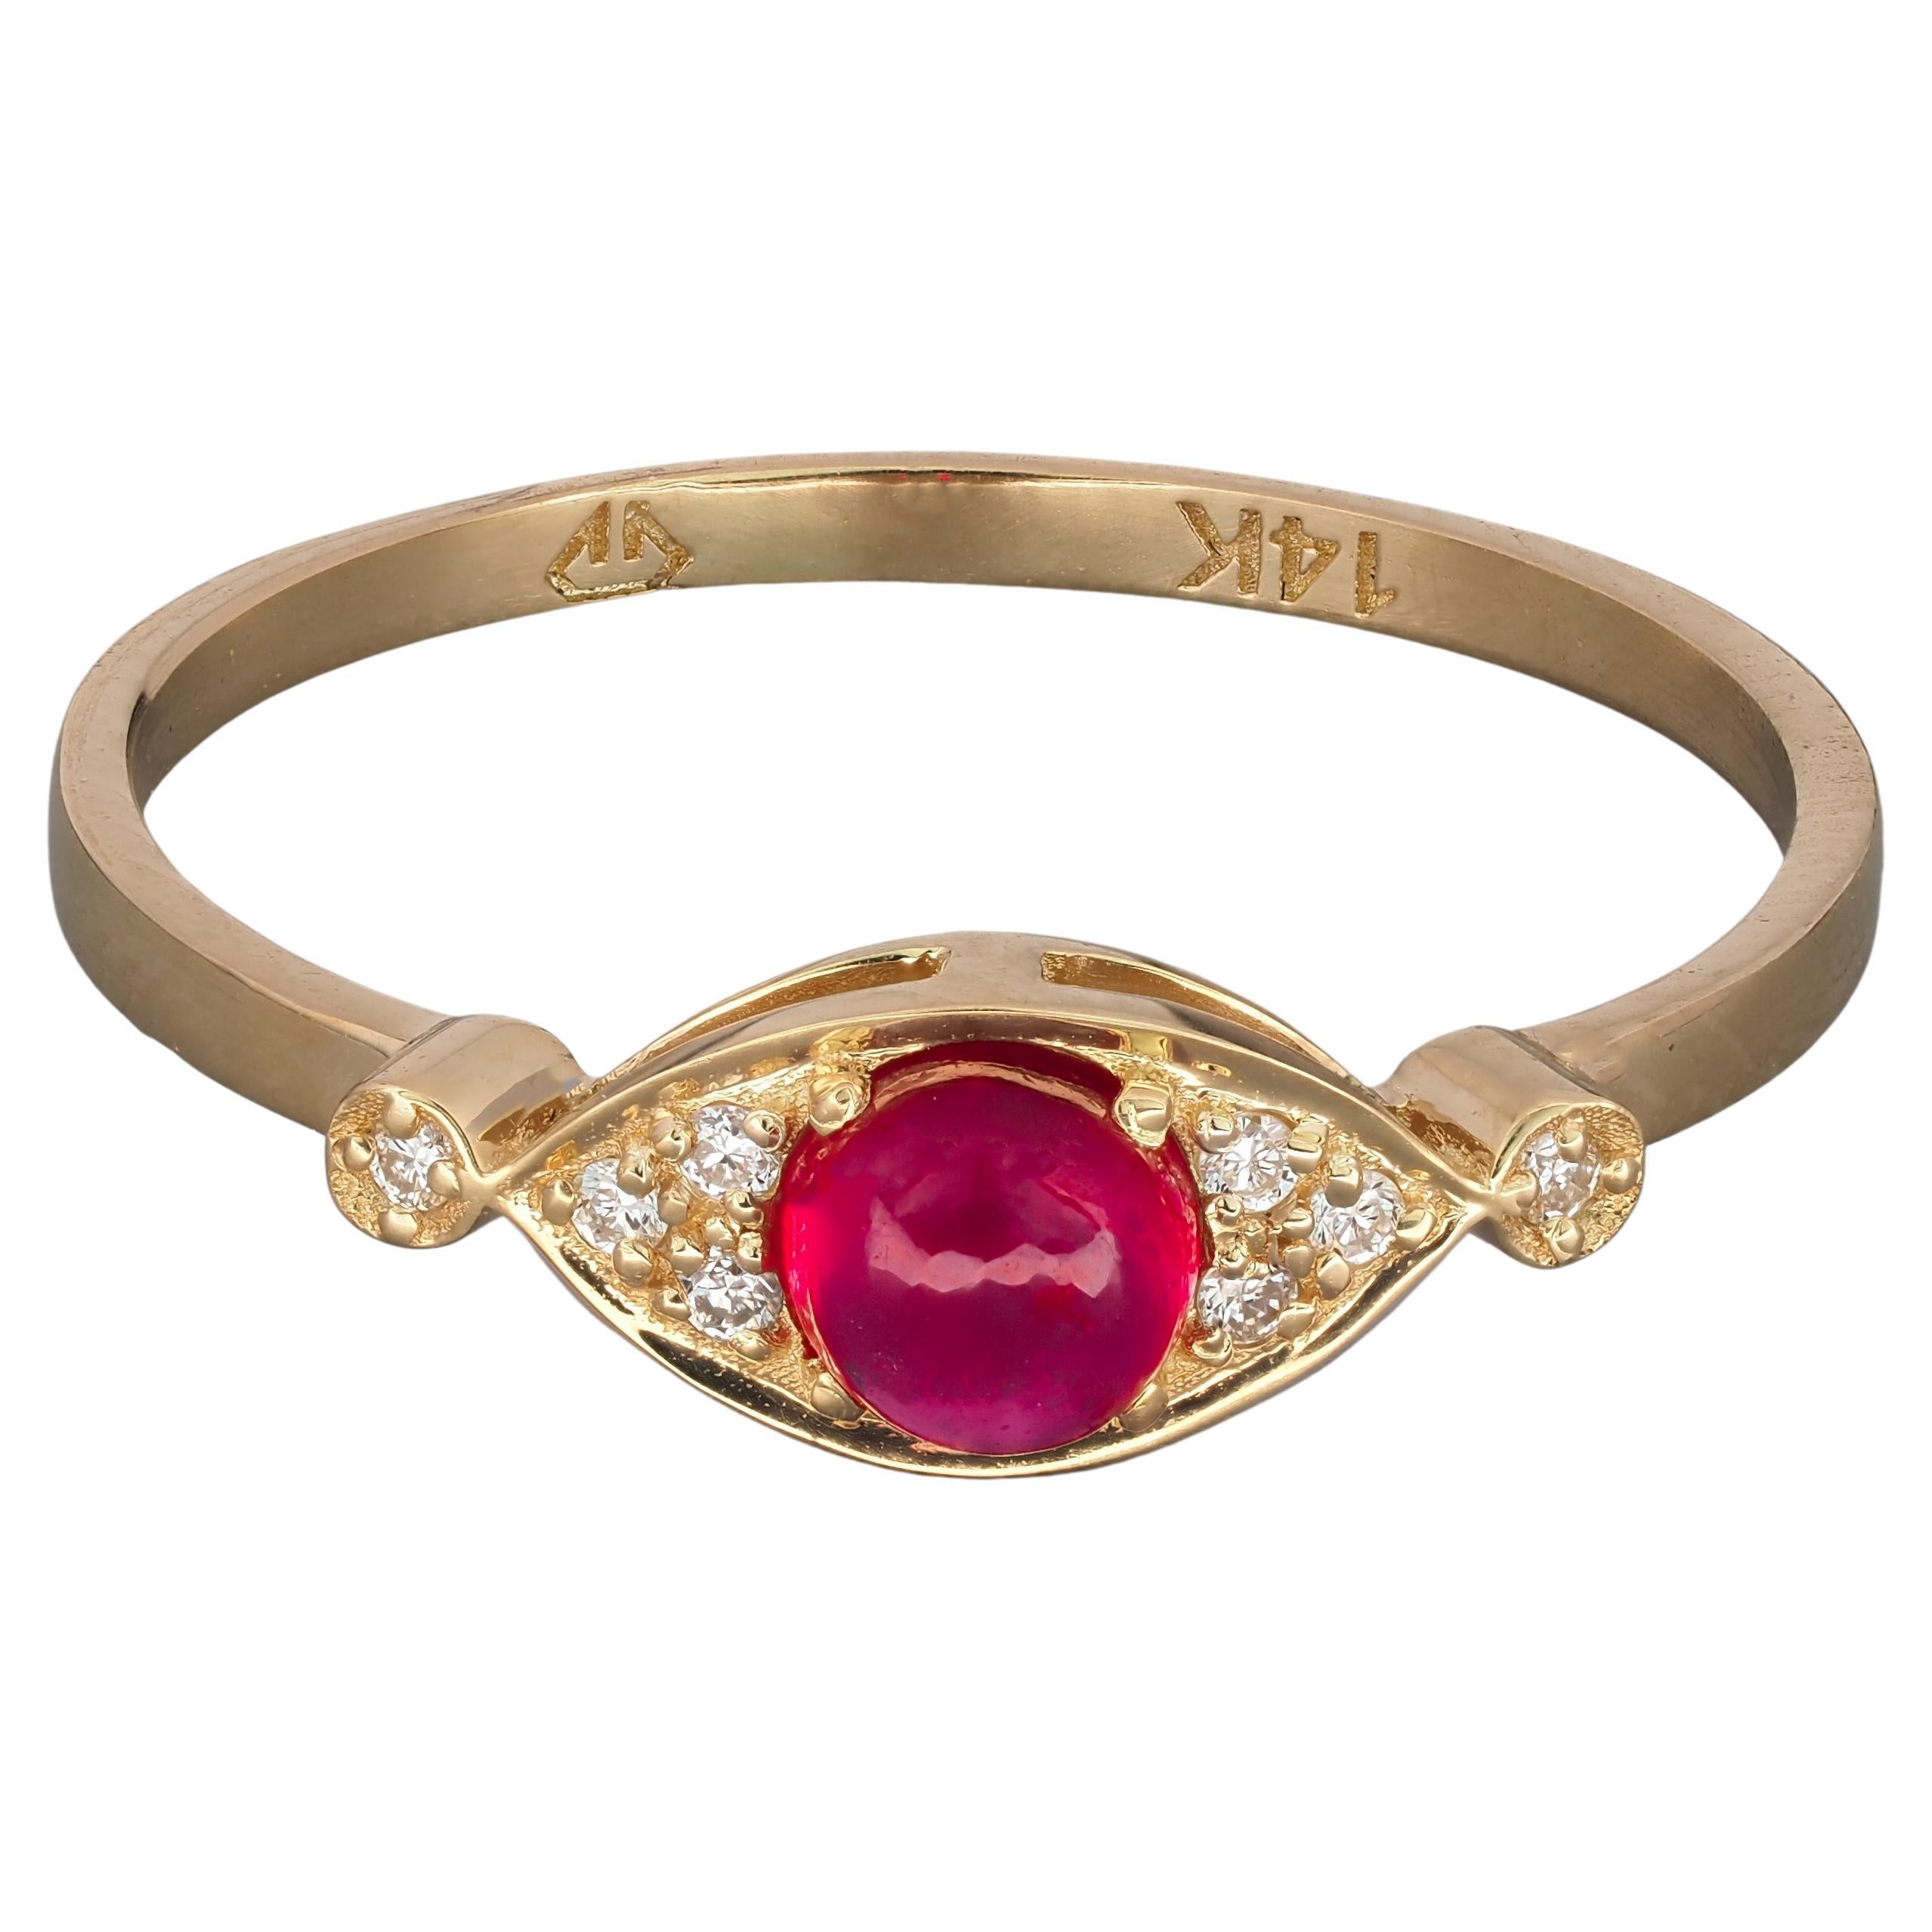 14 Karat Gold Ring with Ruby and Diamonds, "Evel Eye" Gold Ring